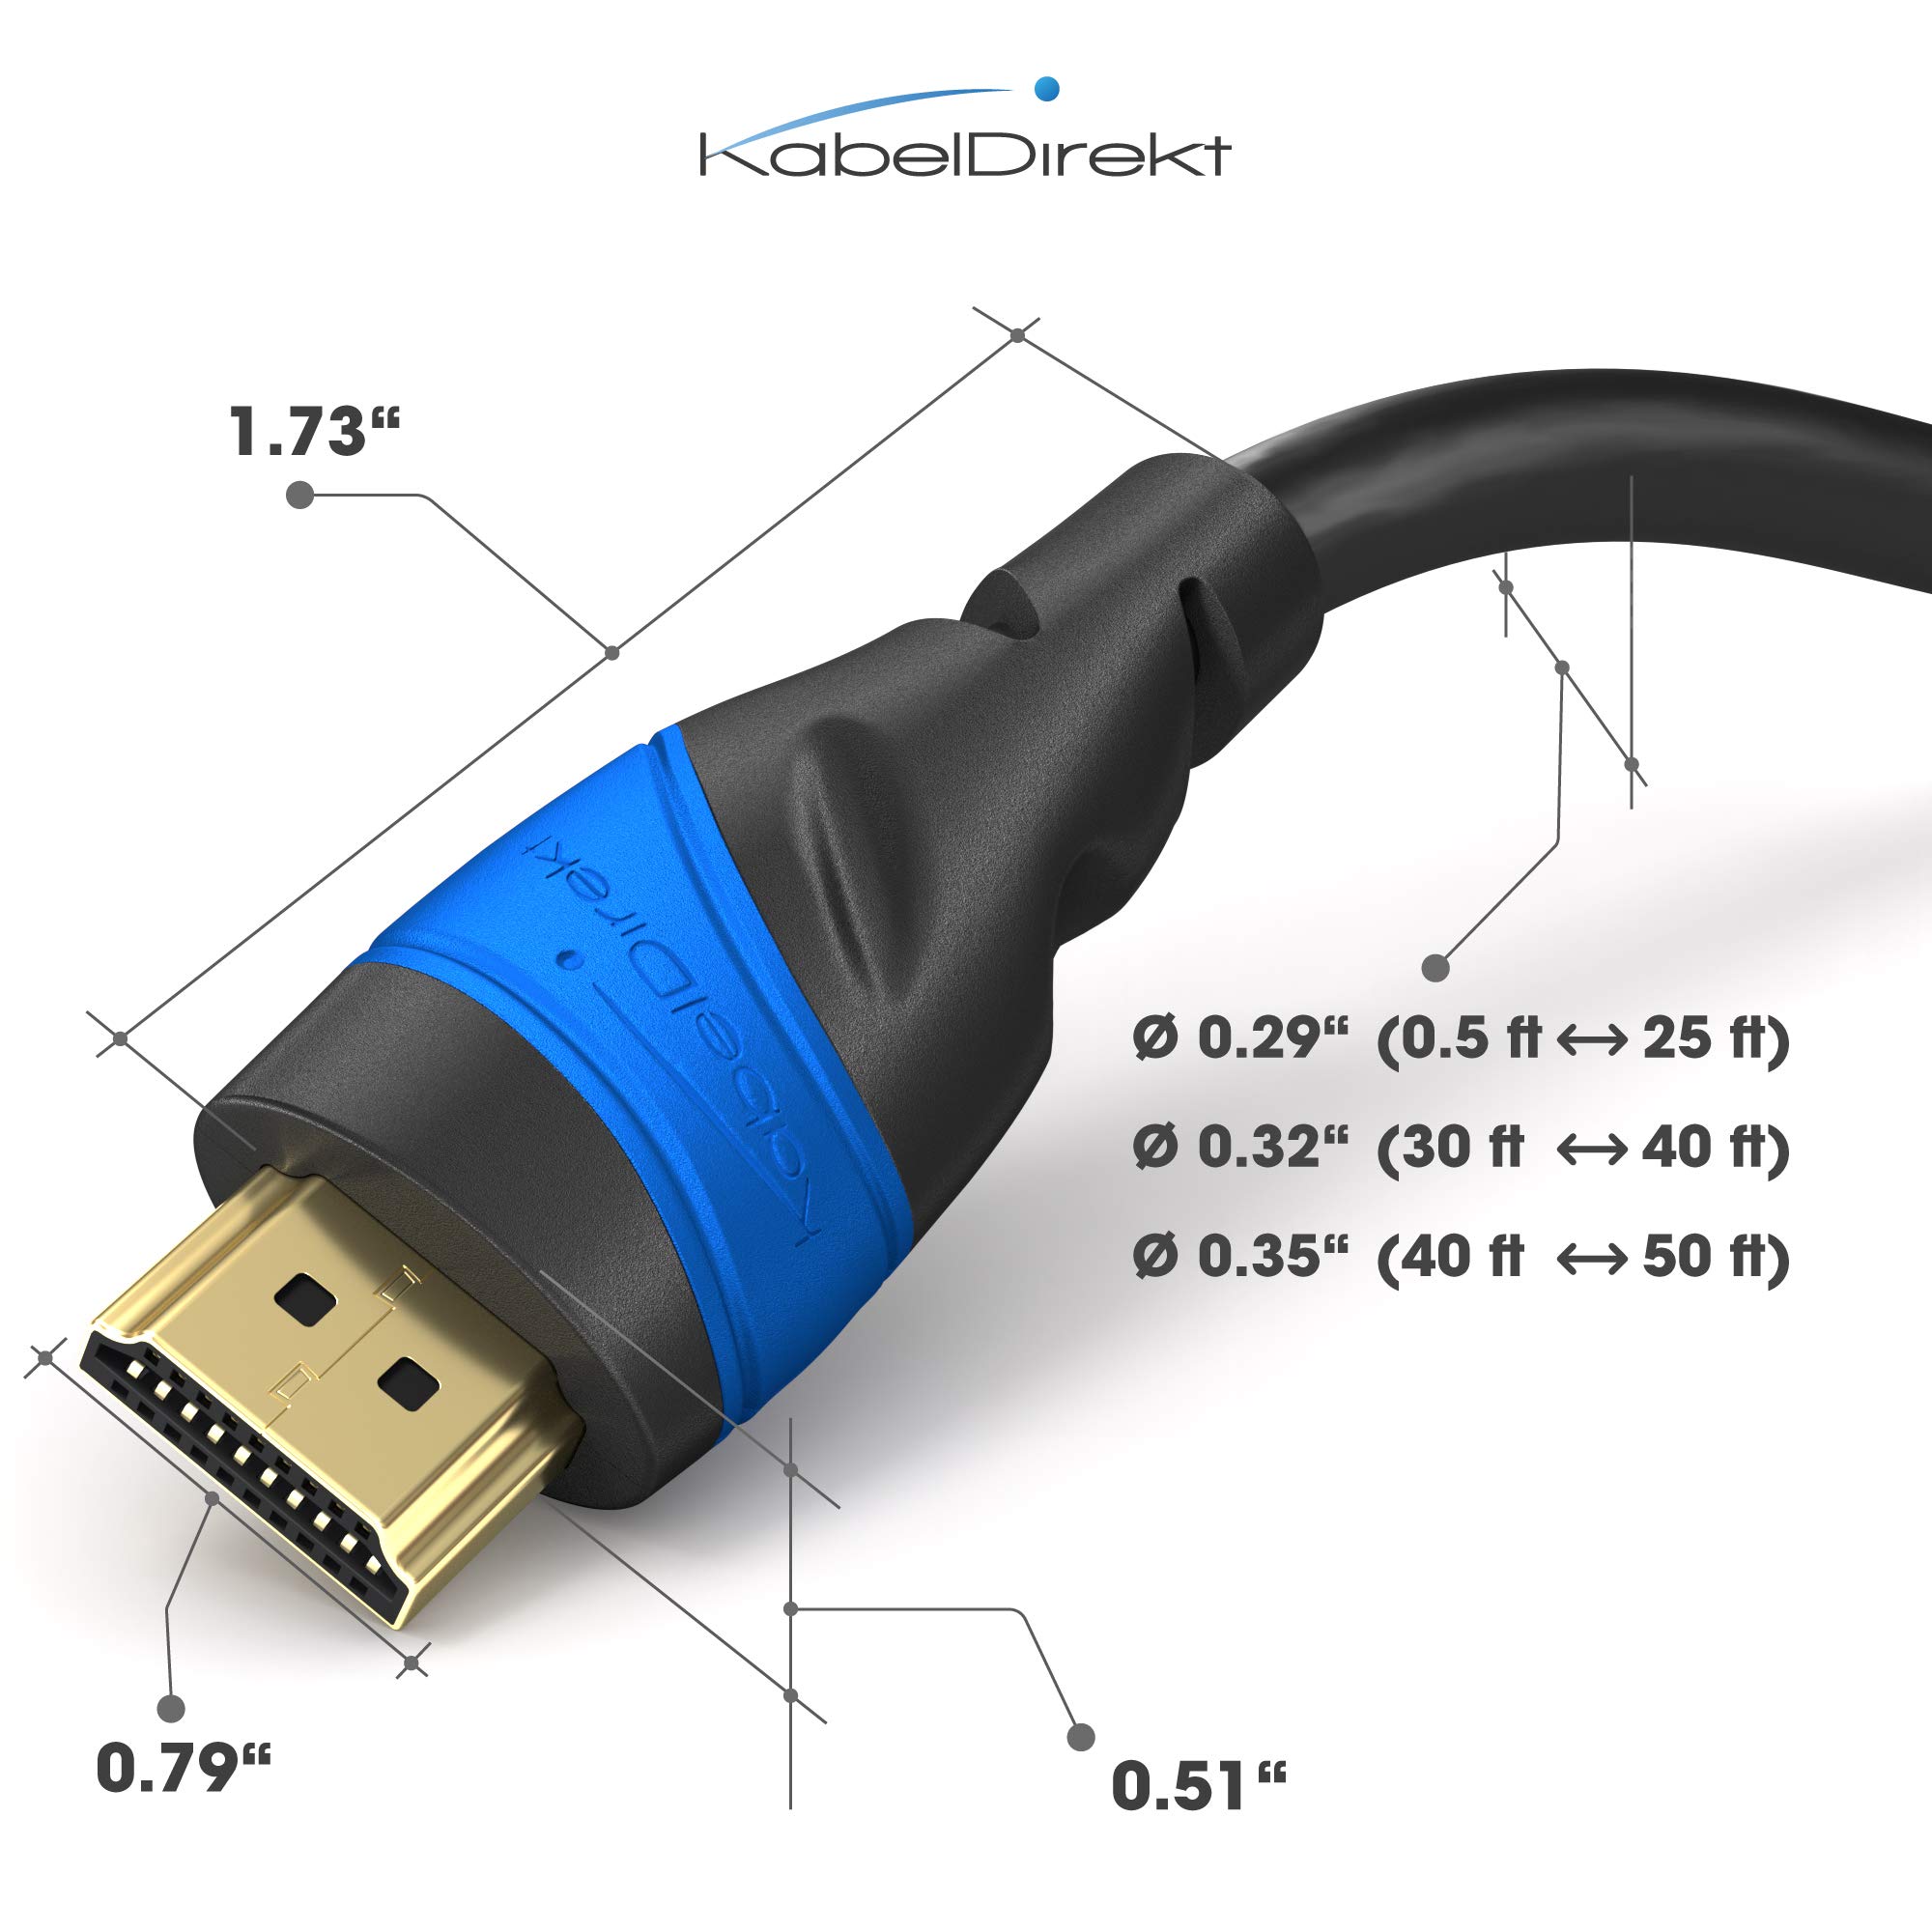 HDMI Cable 4K – 20ft – with A.I.S Shielding – Designed in Germany (Supports All HDMI Devices Like PS5, Xbox, Switch – 4K@60Hz, High Speed HDMI Cord with Ethernet, Black) – by CableDirect